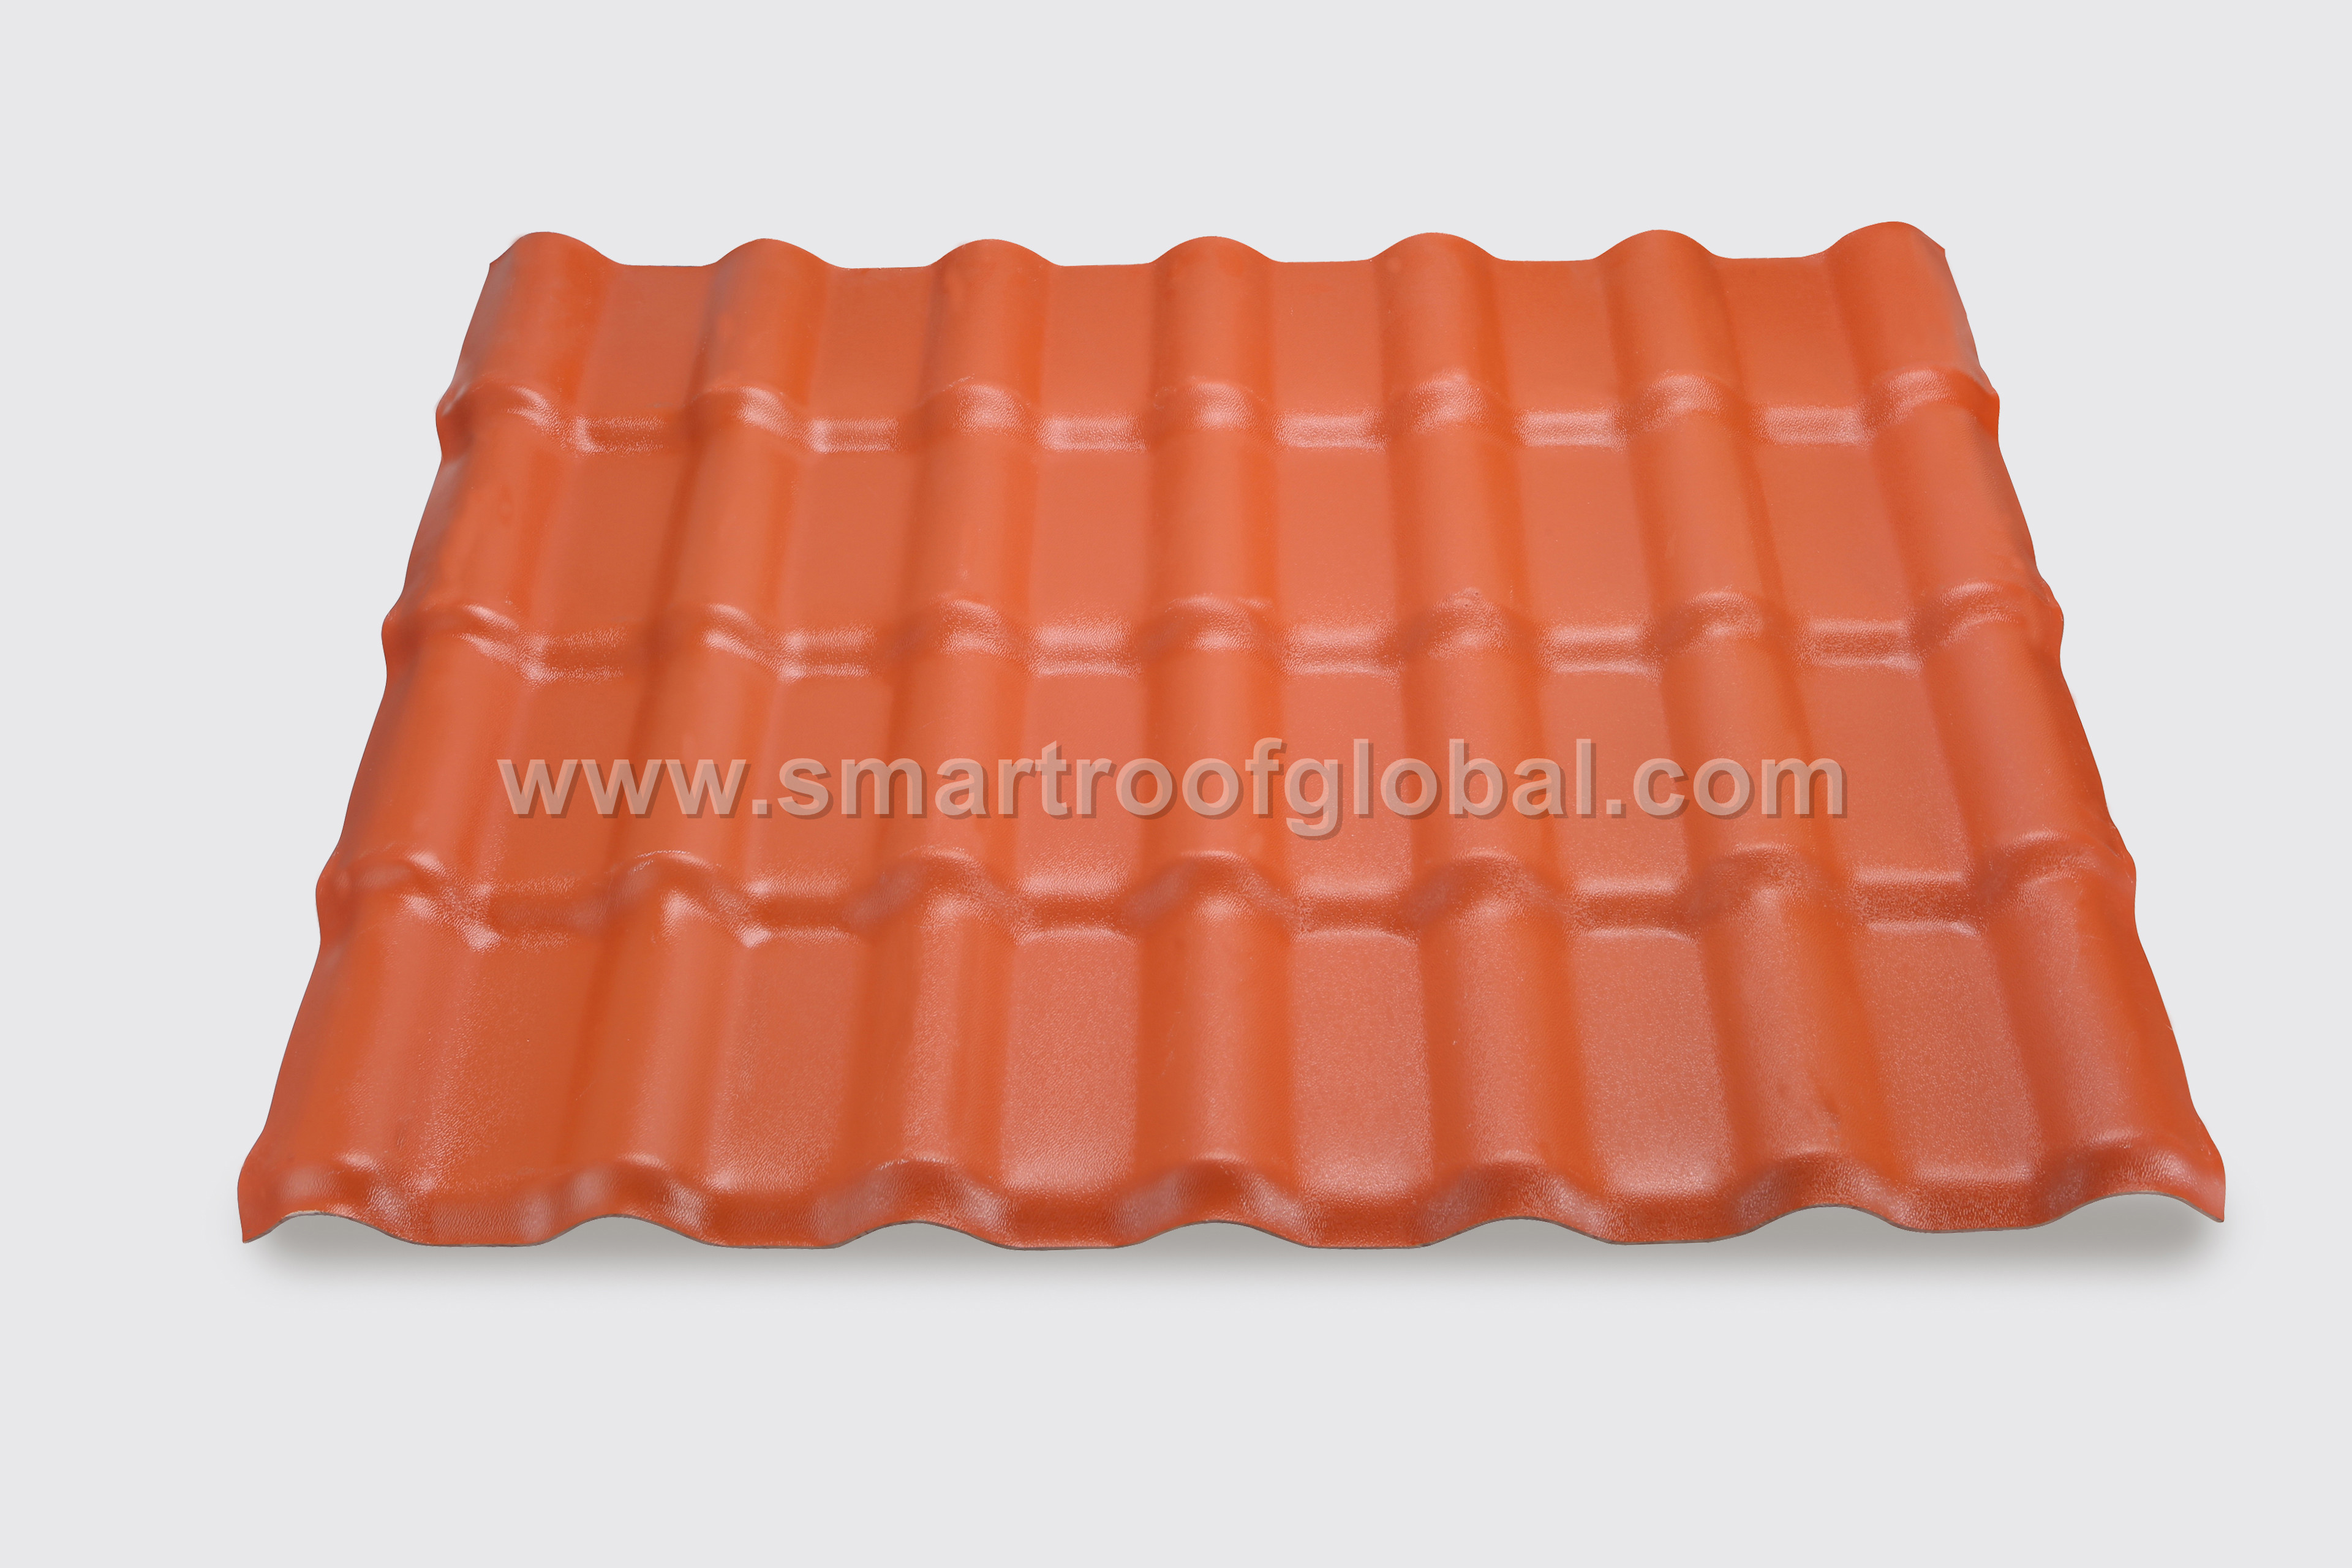 PriceList for Upvc Roofing Sheet - Pvc Resin Roofing Sheet – Smartroof